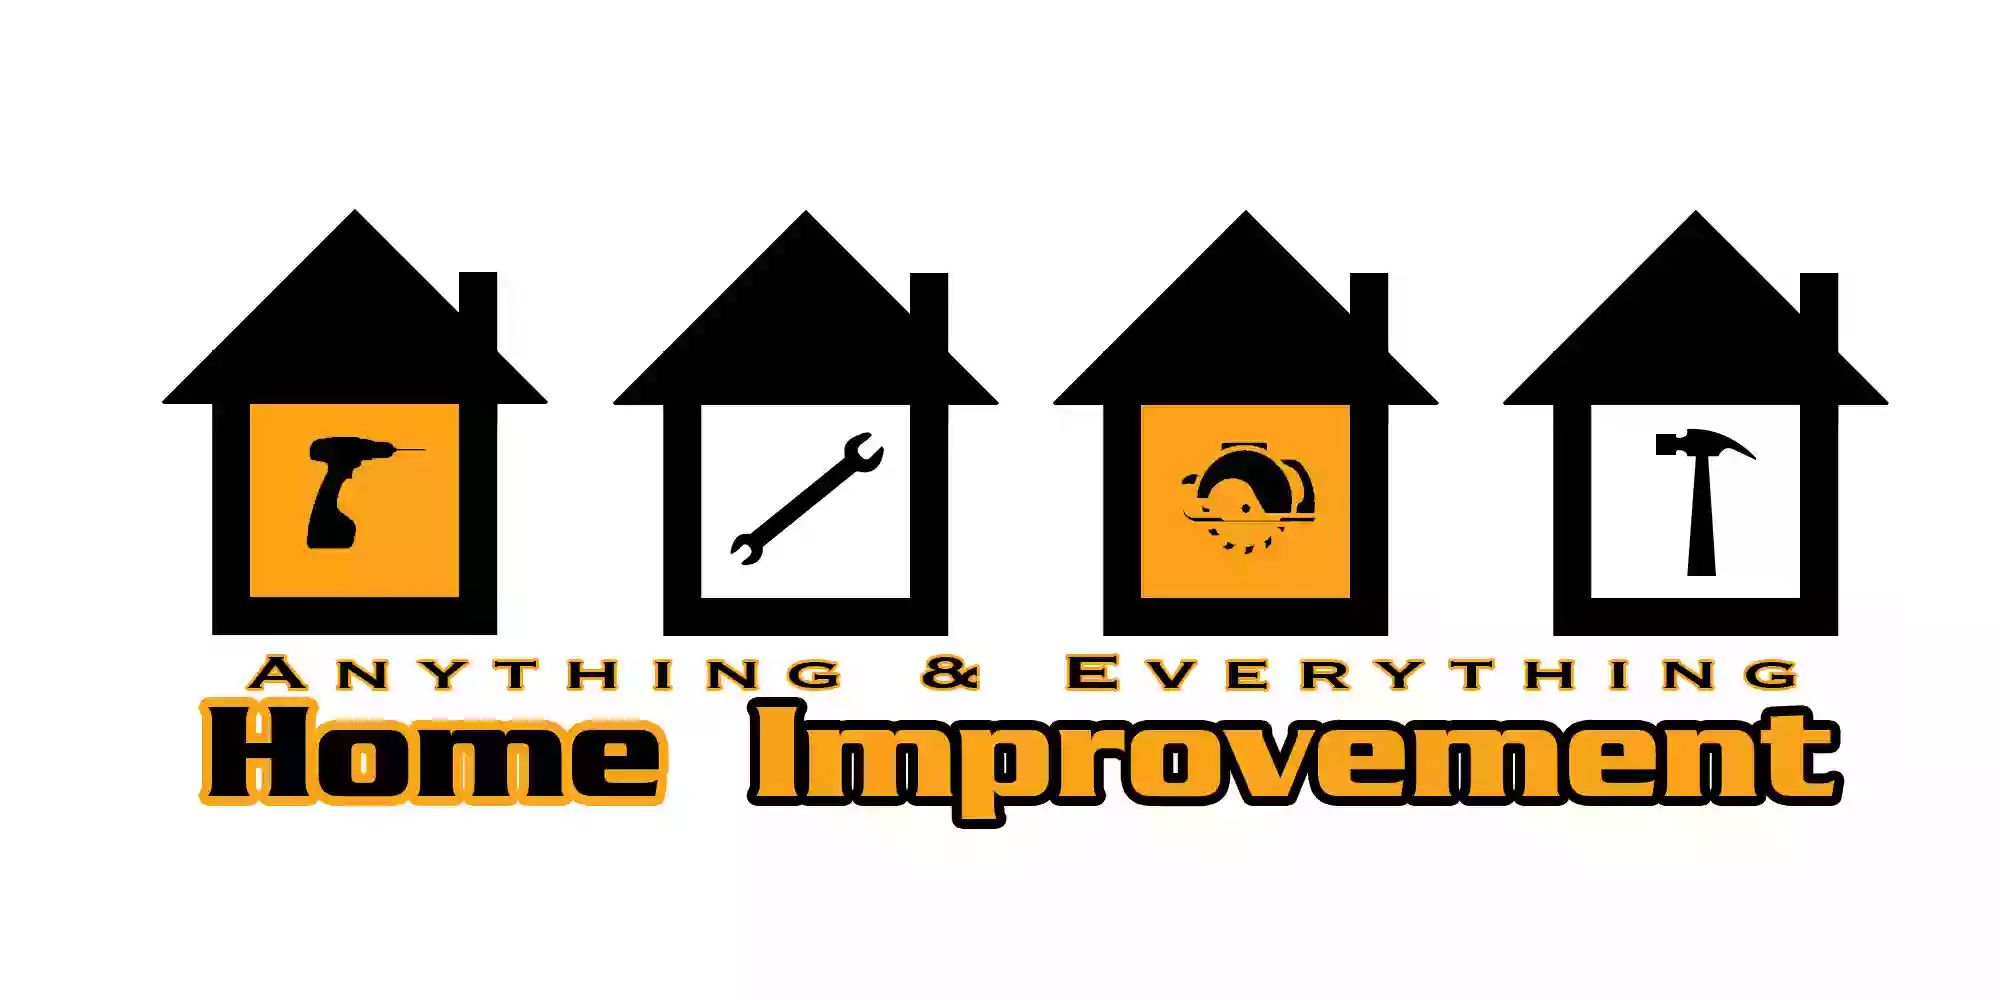 Anything & Everything Home improvement, LL